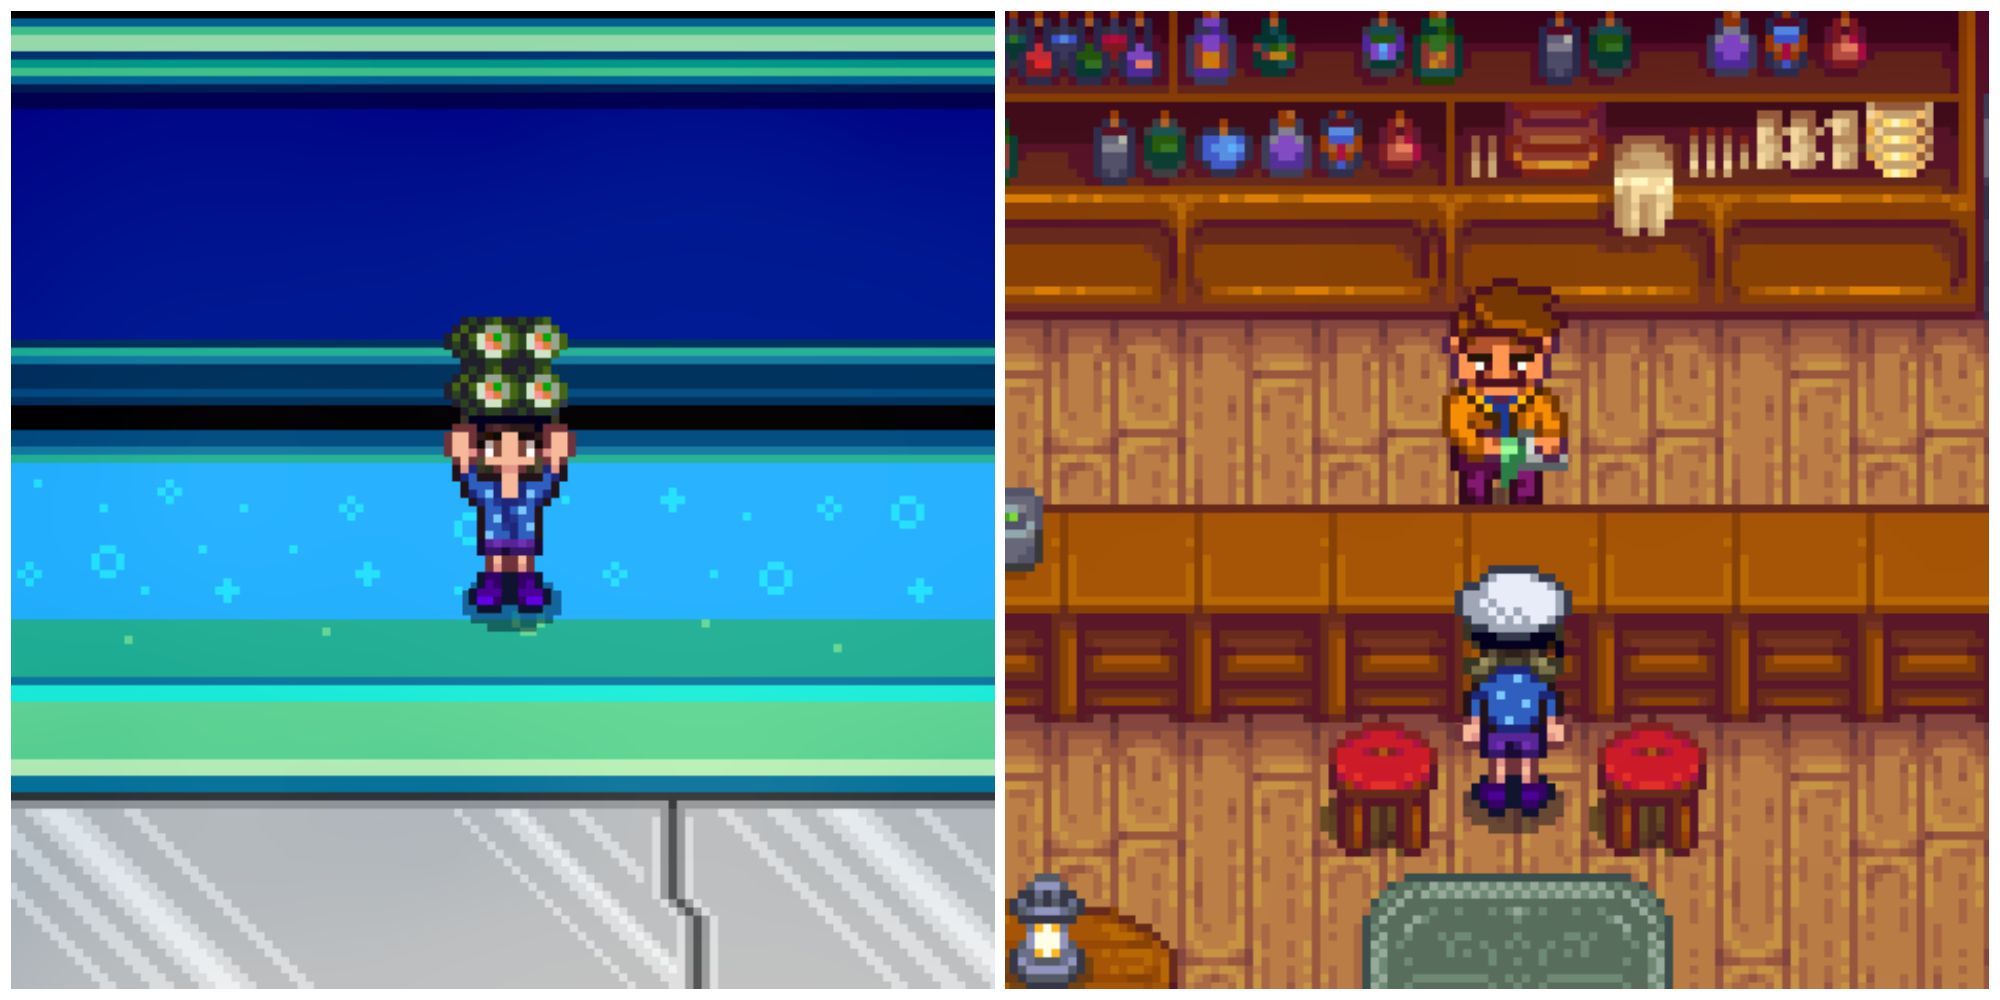 Split image of a character holding a Maki Roll and a character inside the Stardrop Saloon in Stardew Valley